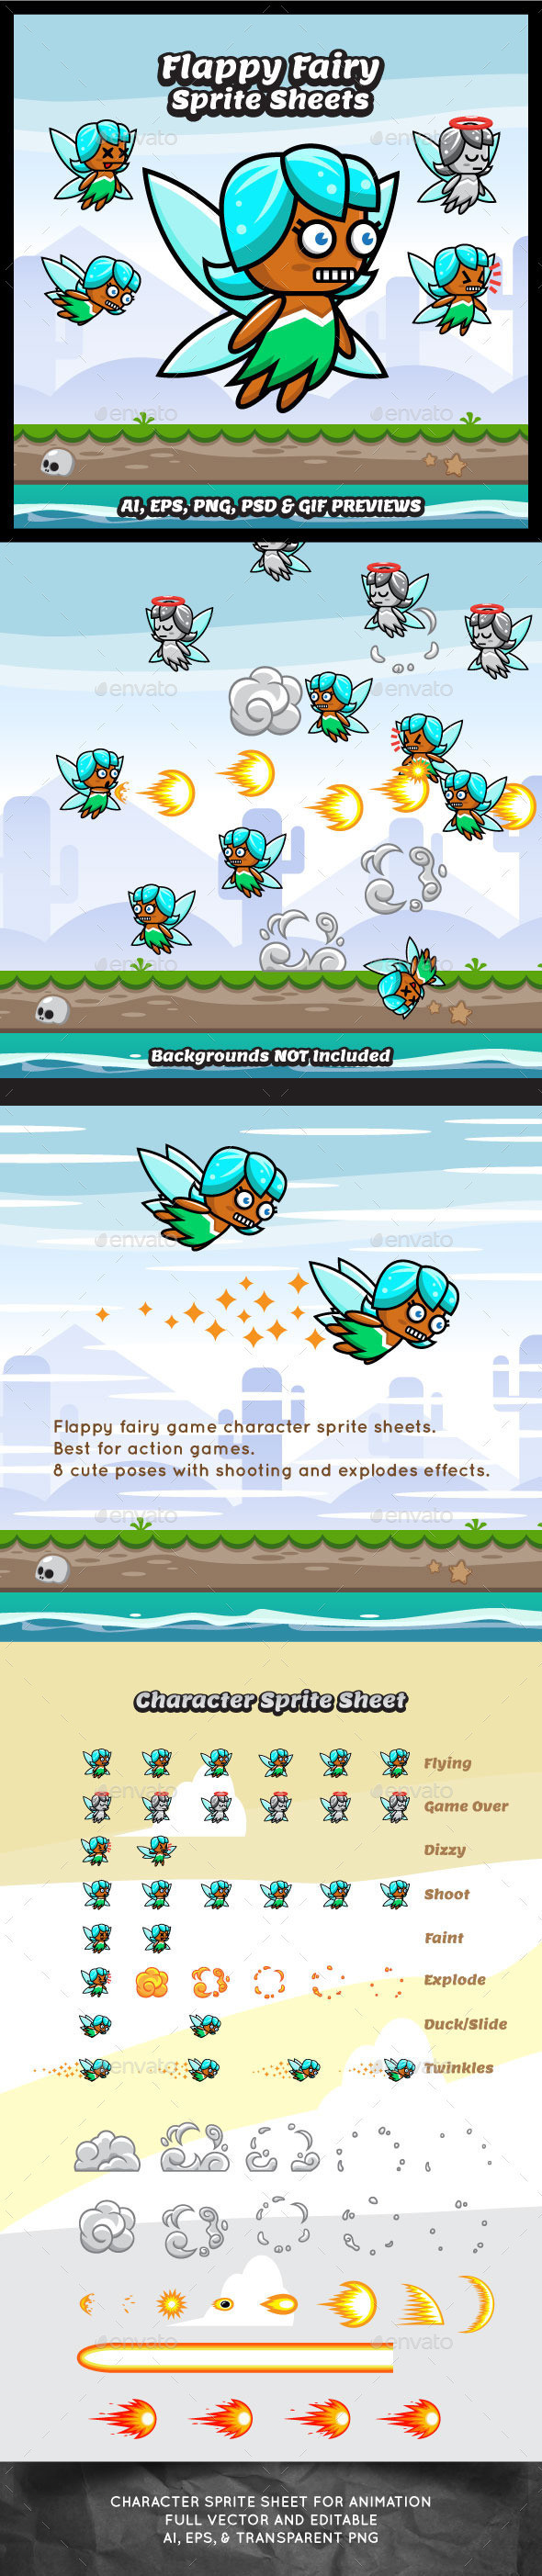 Game character sprite sheet sidescroller game asset flying flappy animation gui mobile games gameart game art 590